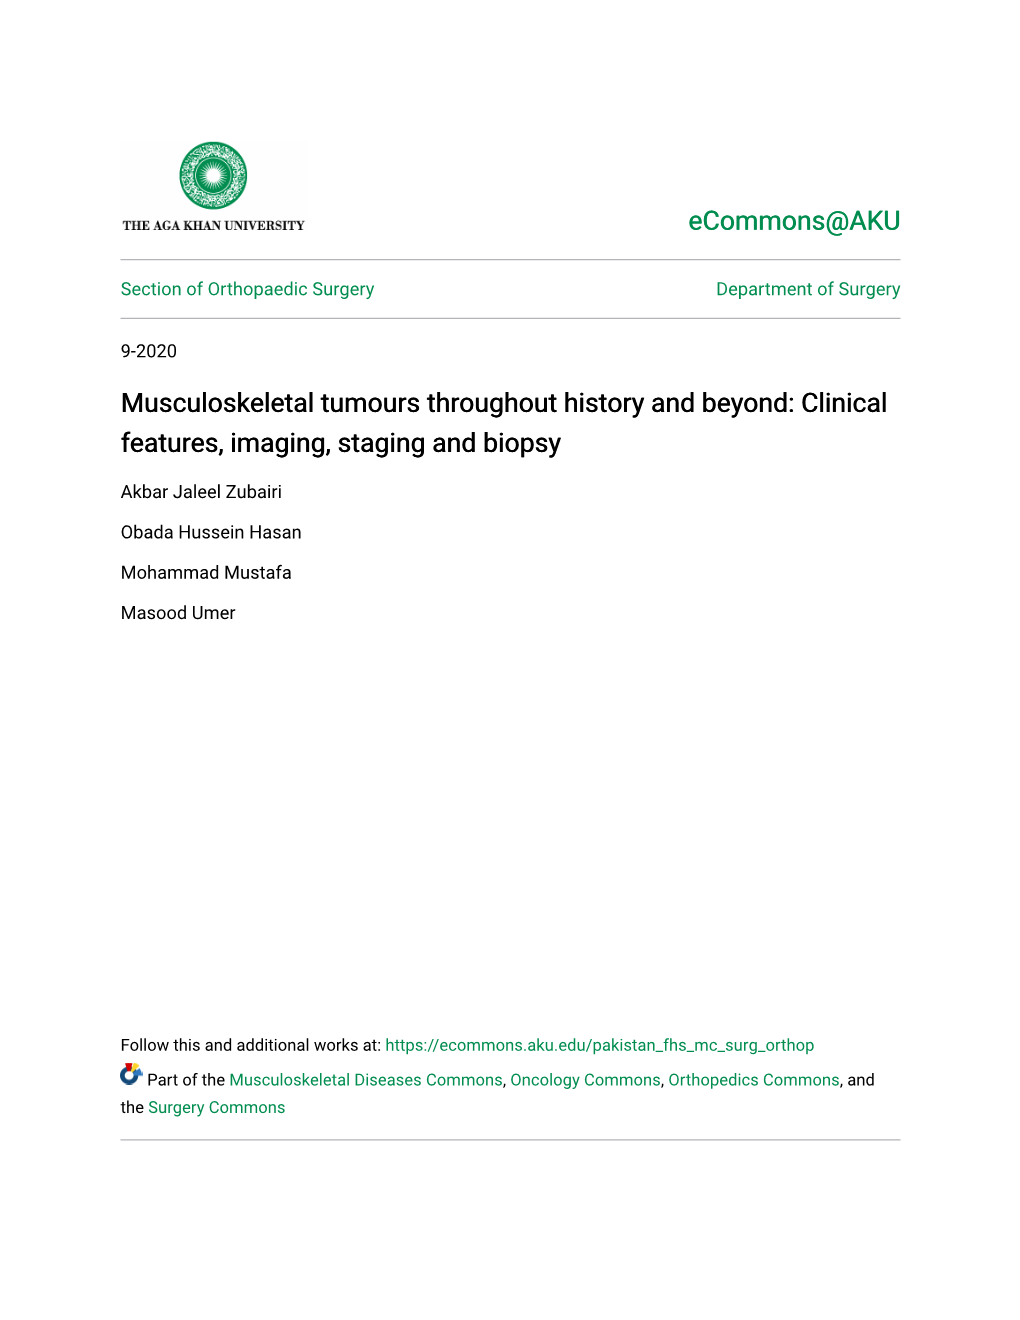 Clinical Features, Imaging, Staging and Biopsy